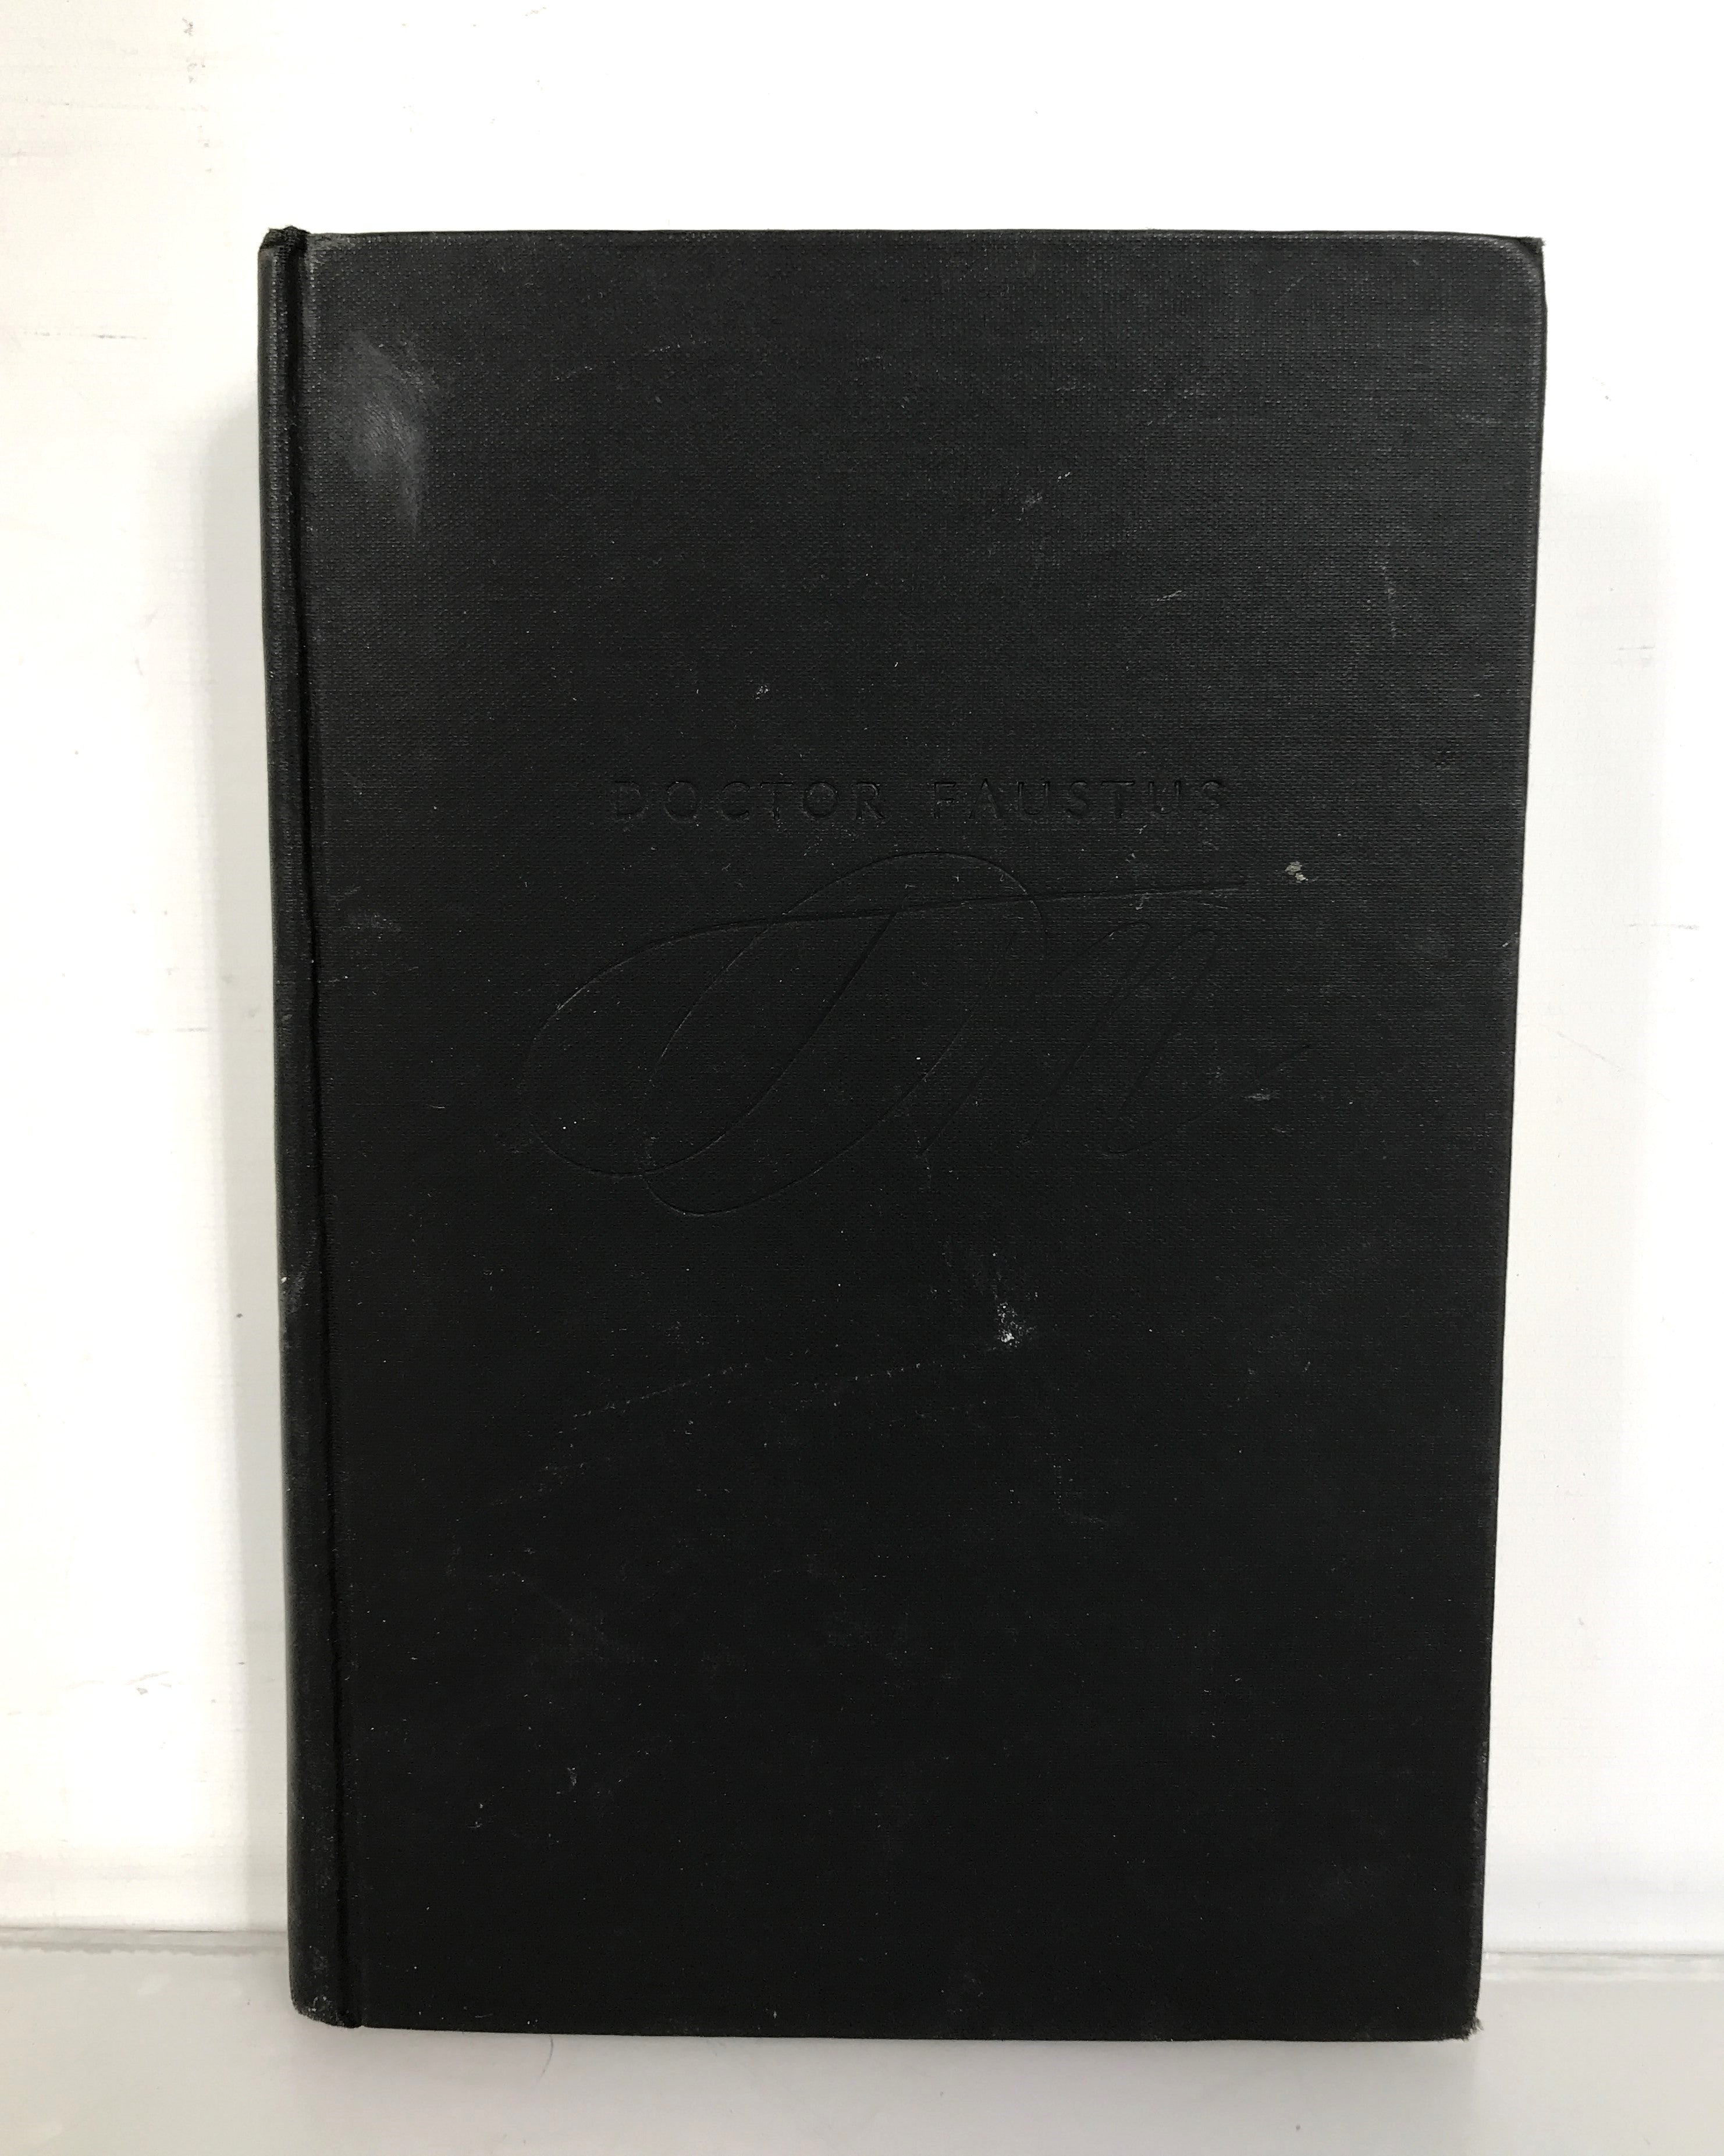 Thomas Mann Doctor Faustus Alfred A. Knopf First American Edition 1948 HC